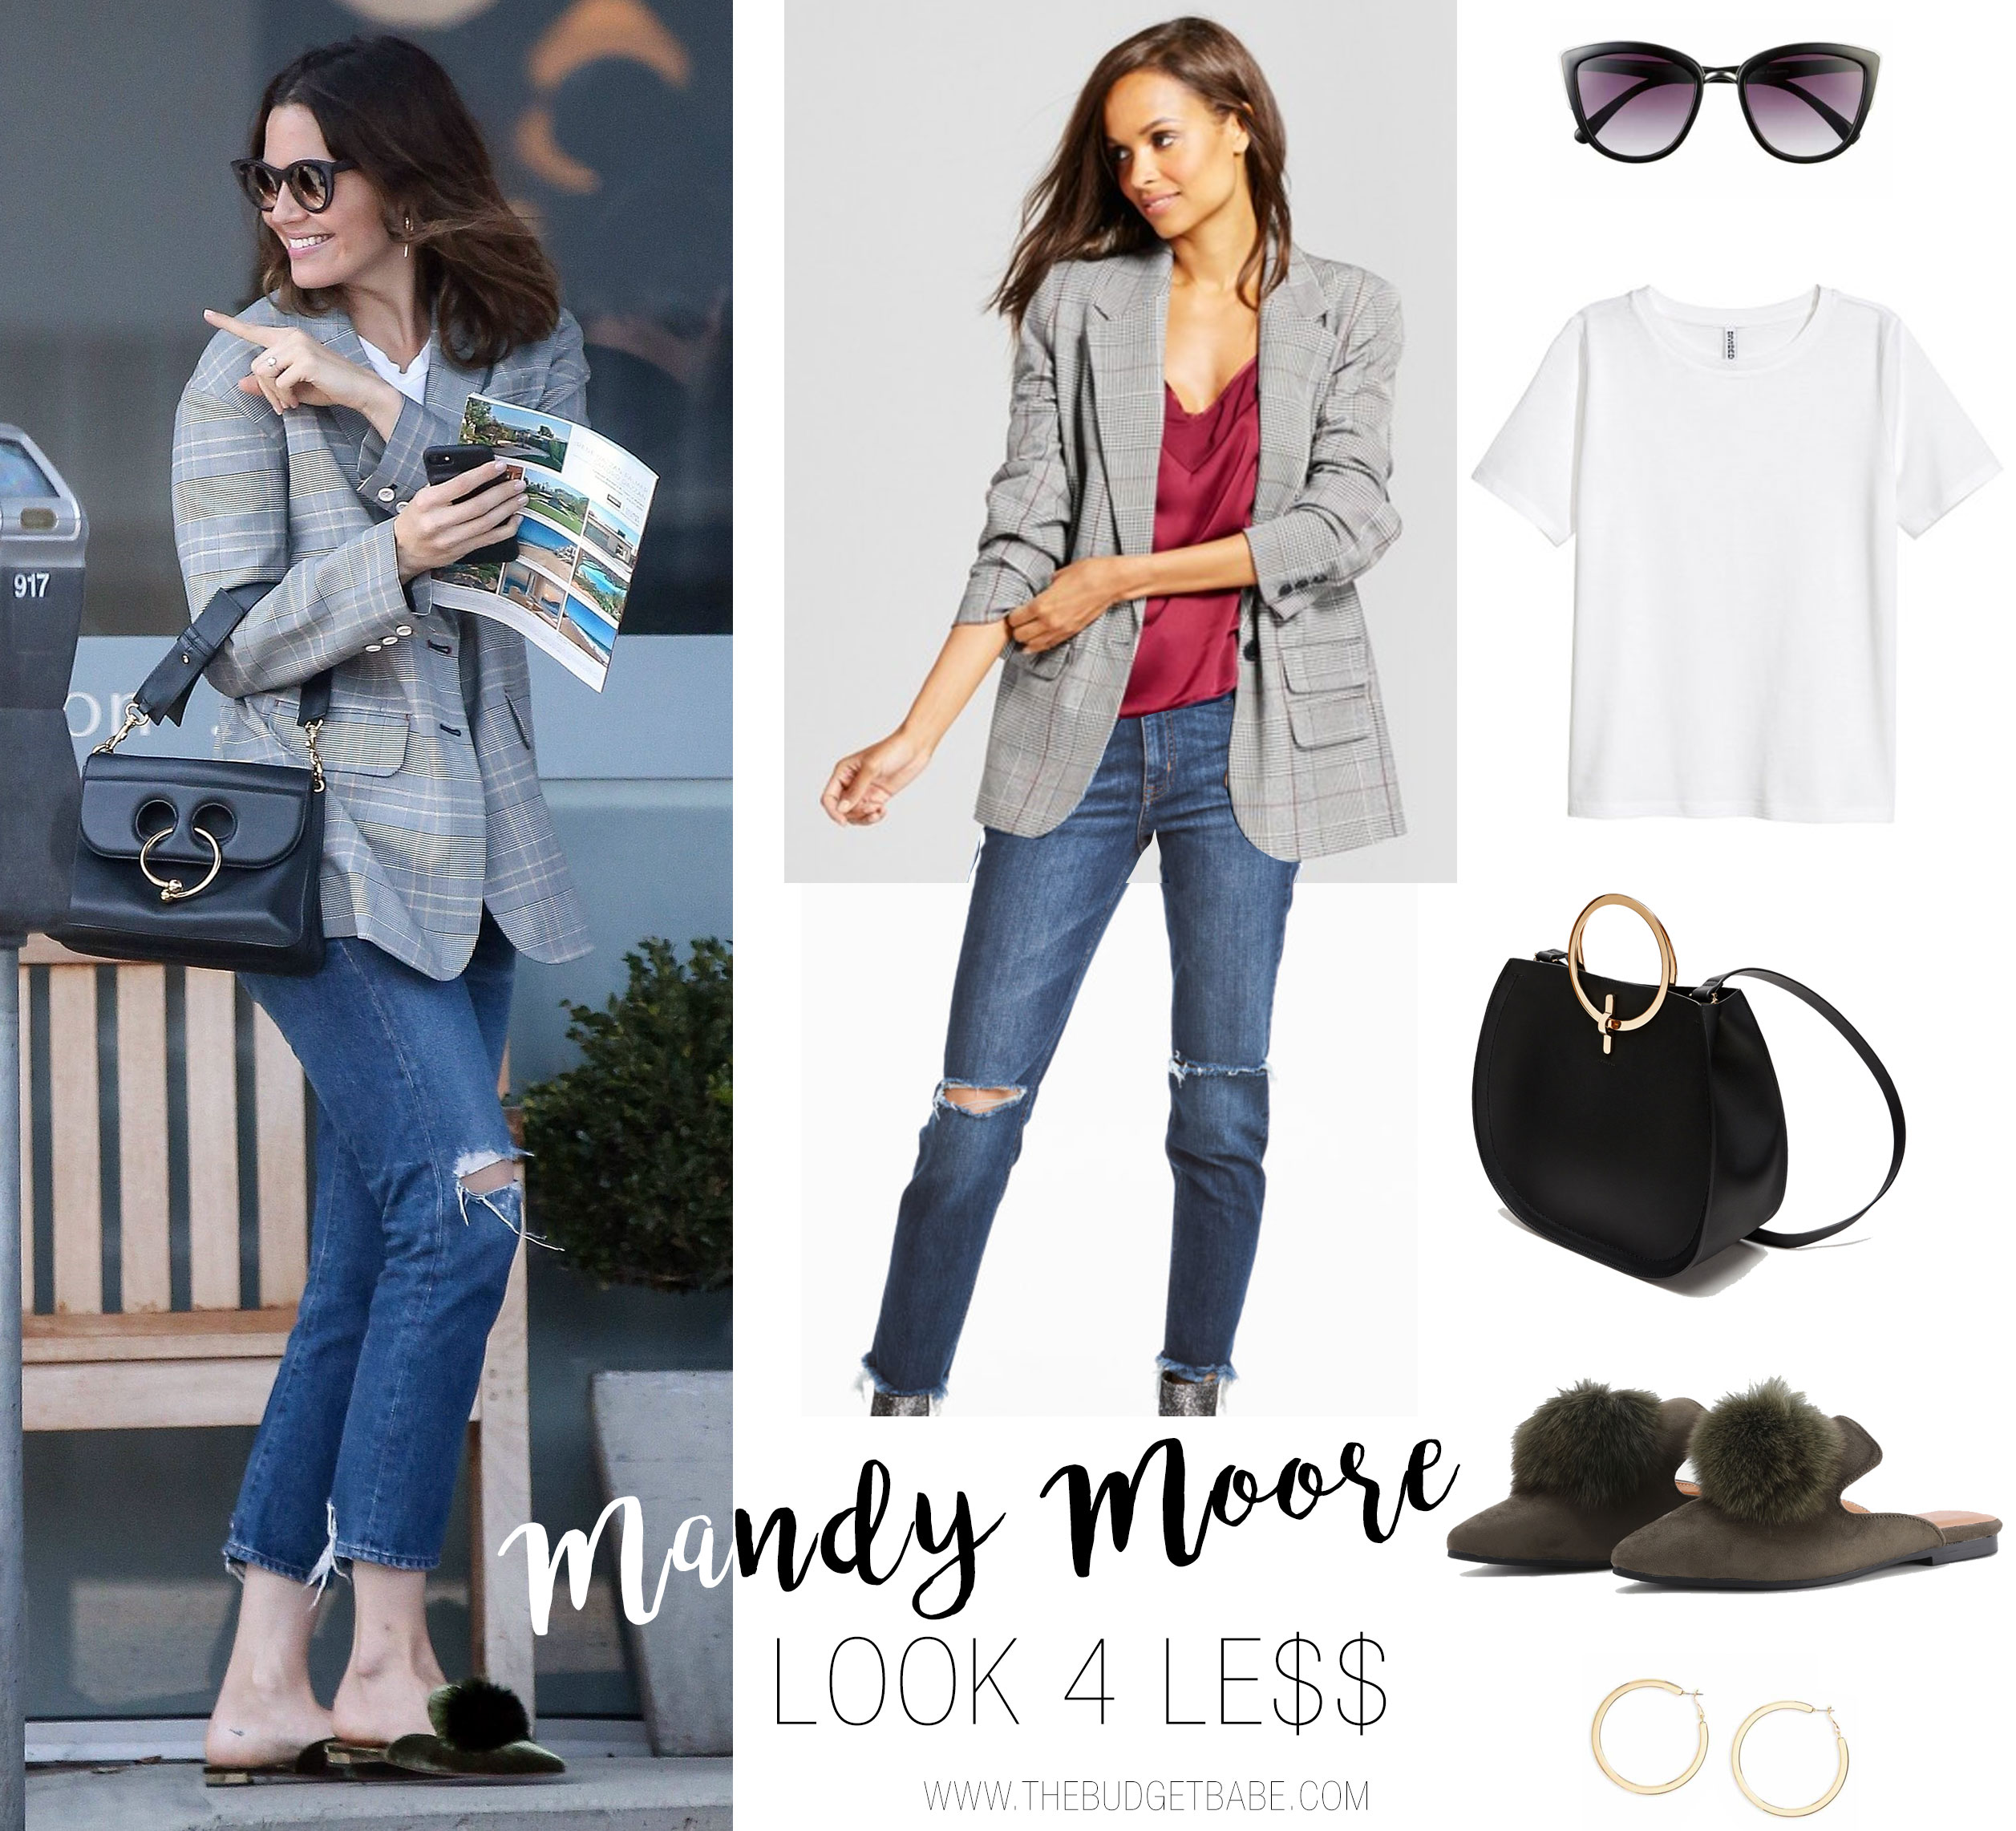 Mandy Moore wears a gray plaid blazer with a white tee, ripped jeans and pom pom fur mules.